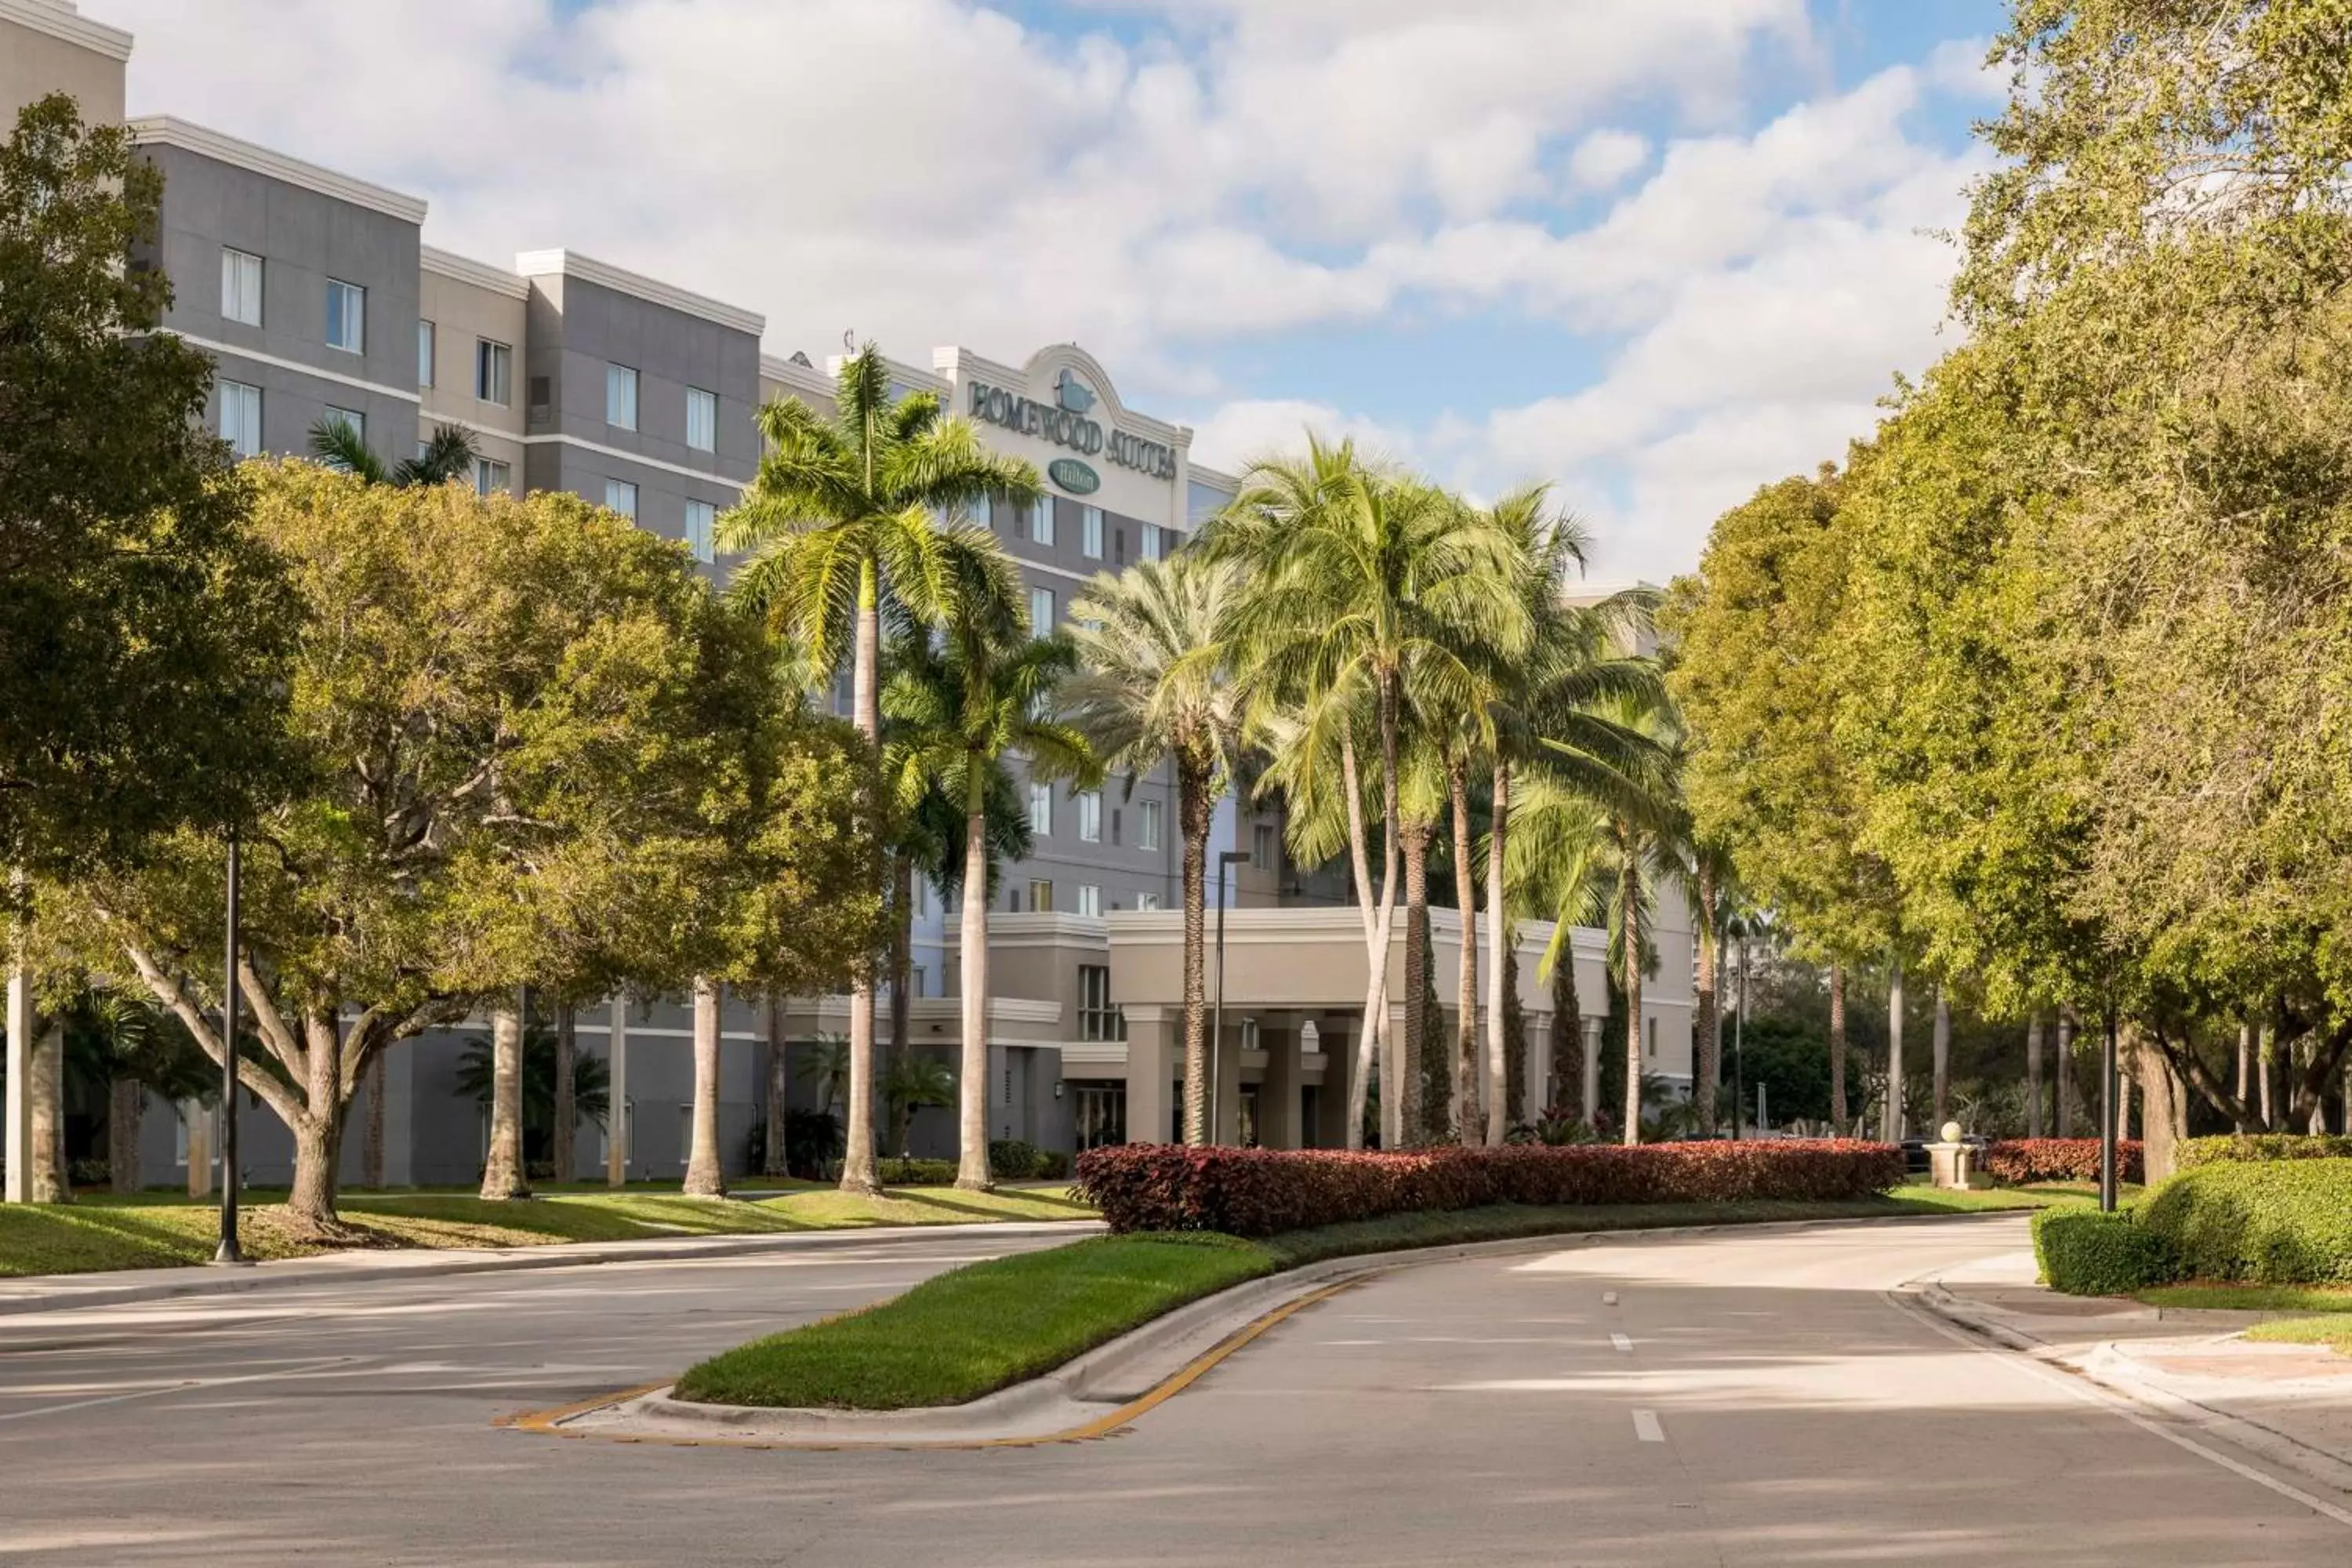 Property Building in Homewood Suites Miami Airport/Blue Lagoon